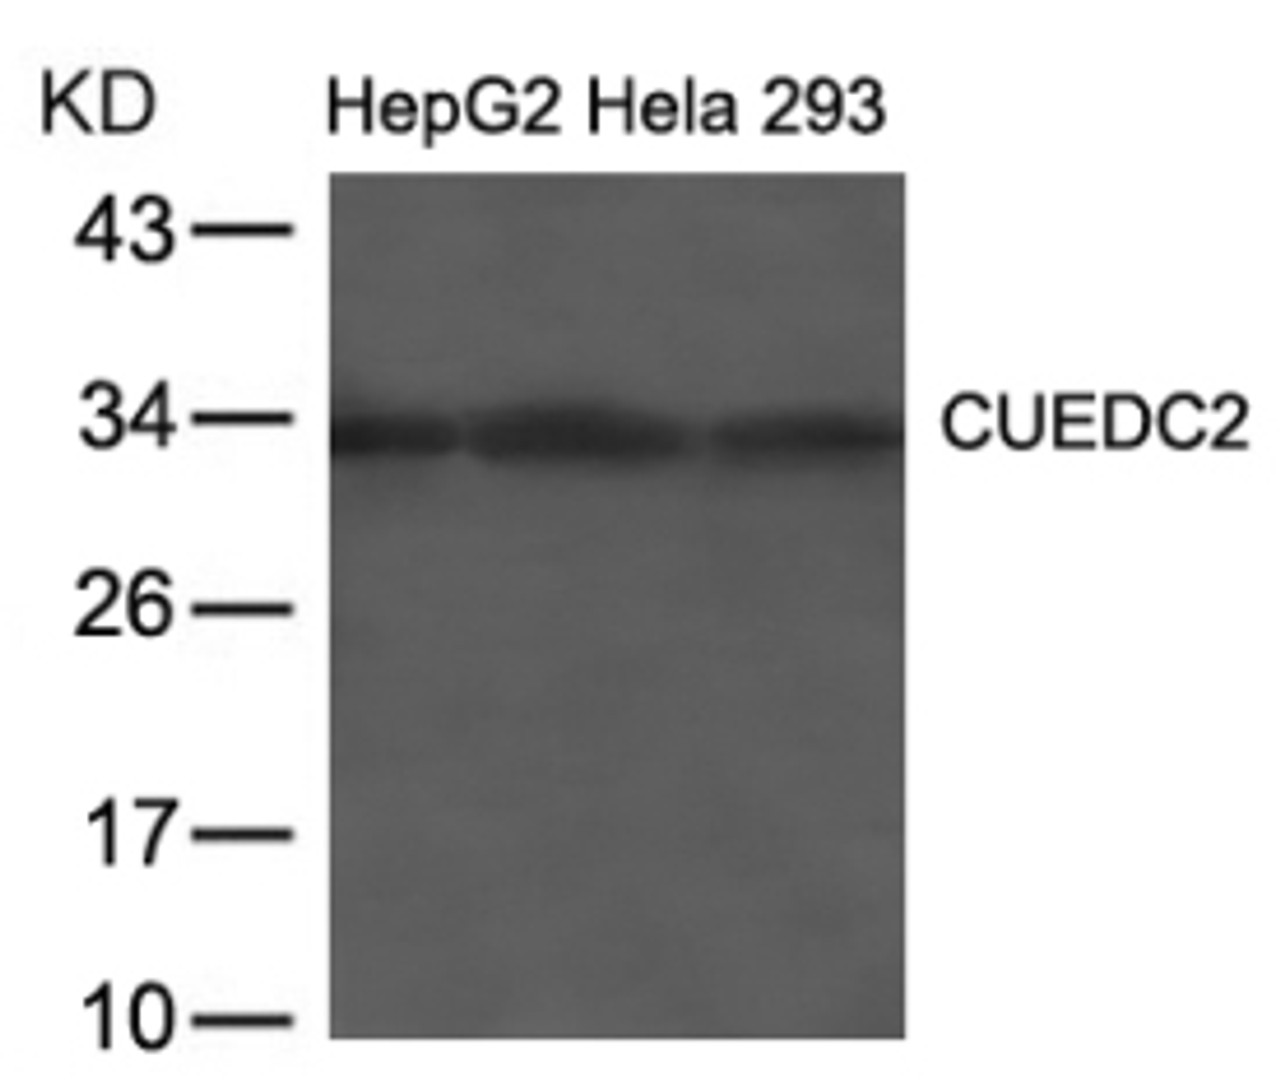 Western blot analysis of lysed extracts from HepG2, HeLa and 293 cells using CUEDC2 Antibody.